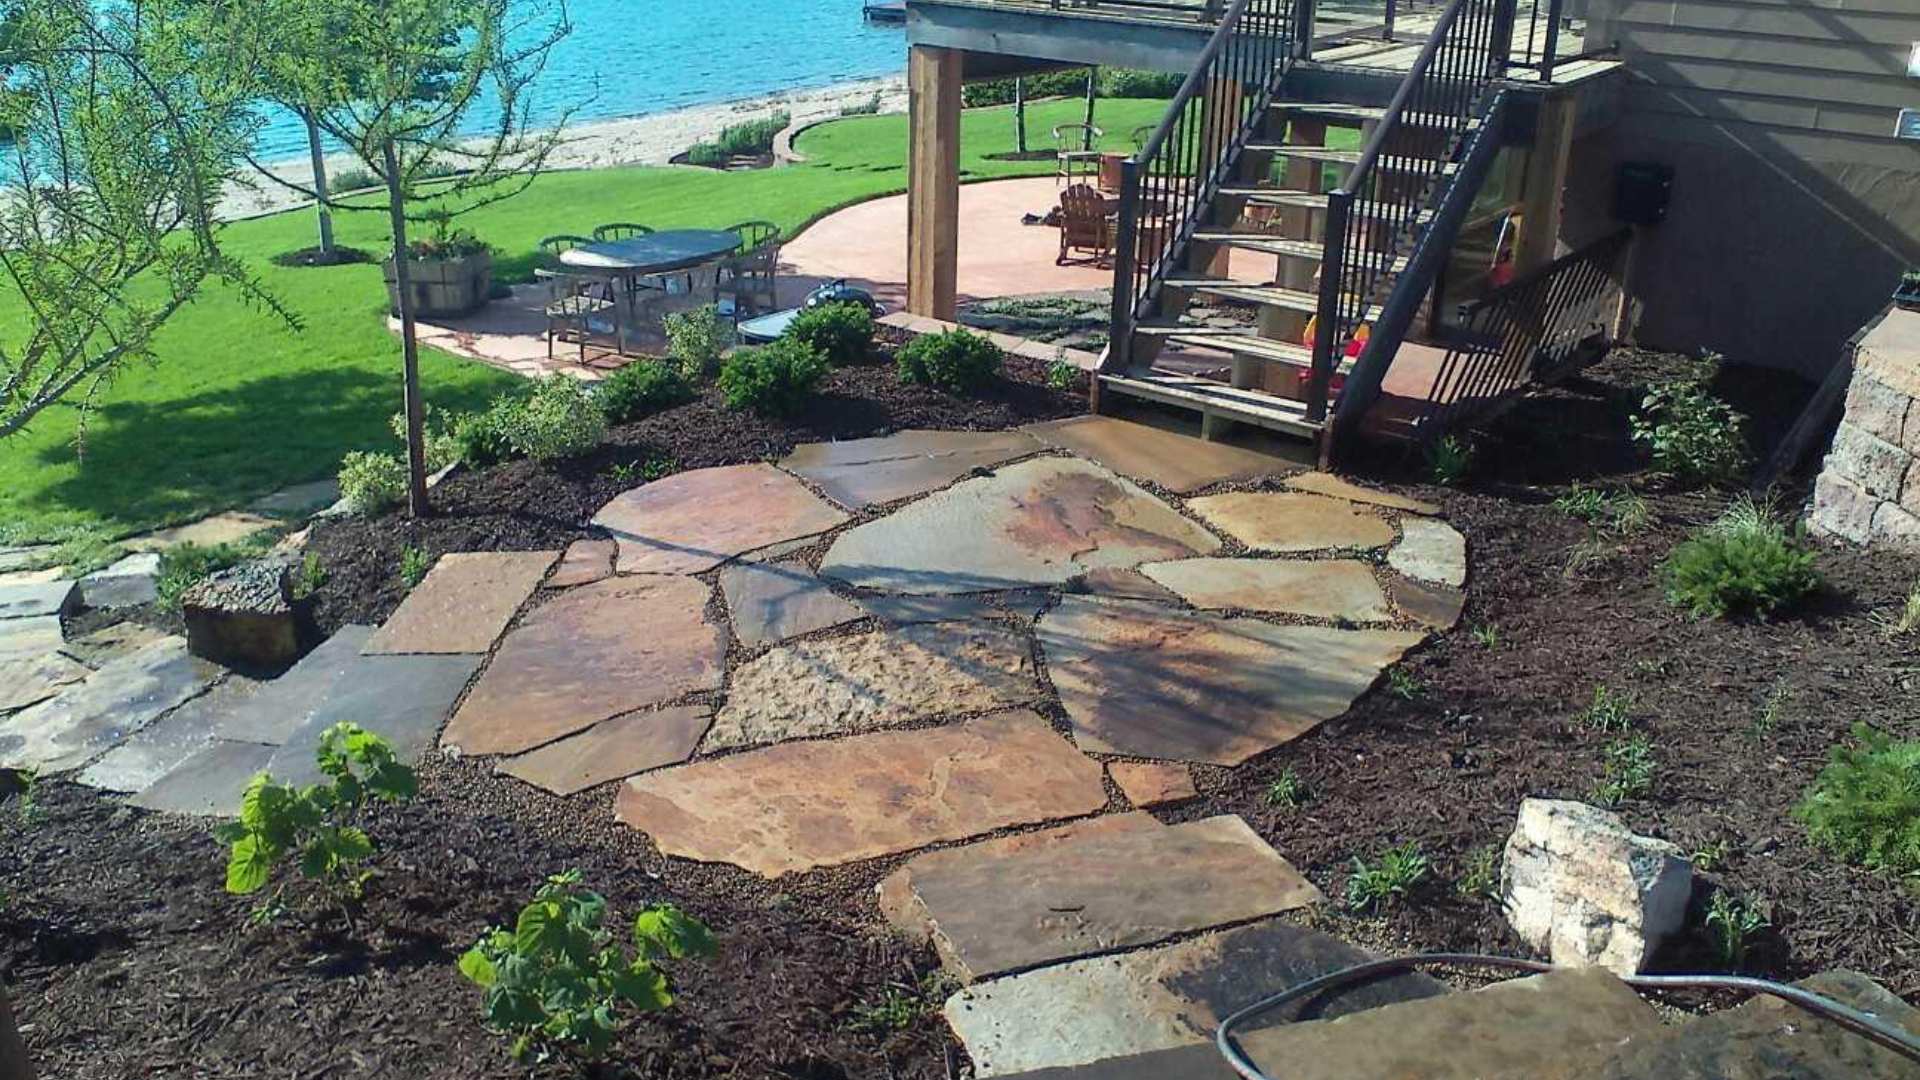 Paver patio with natural stone installed for client's in Papillion, NE.